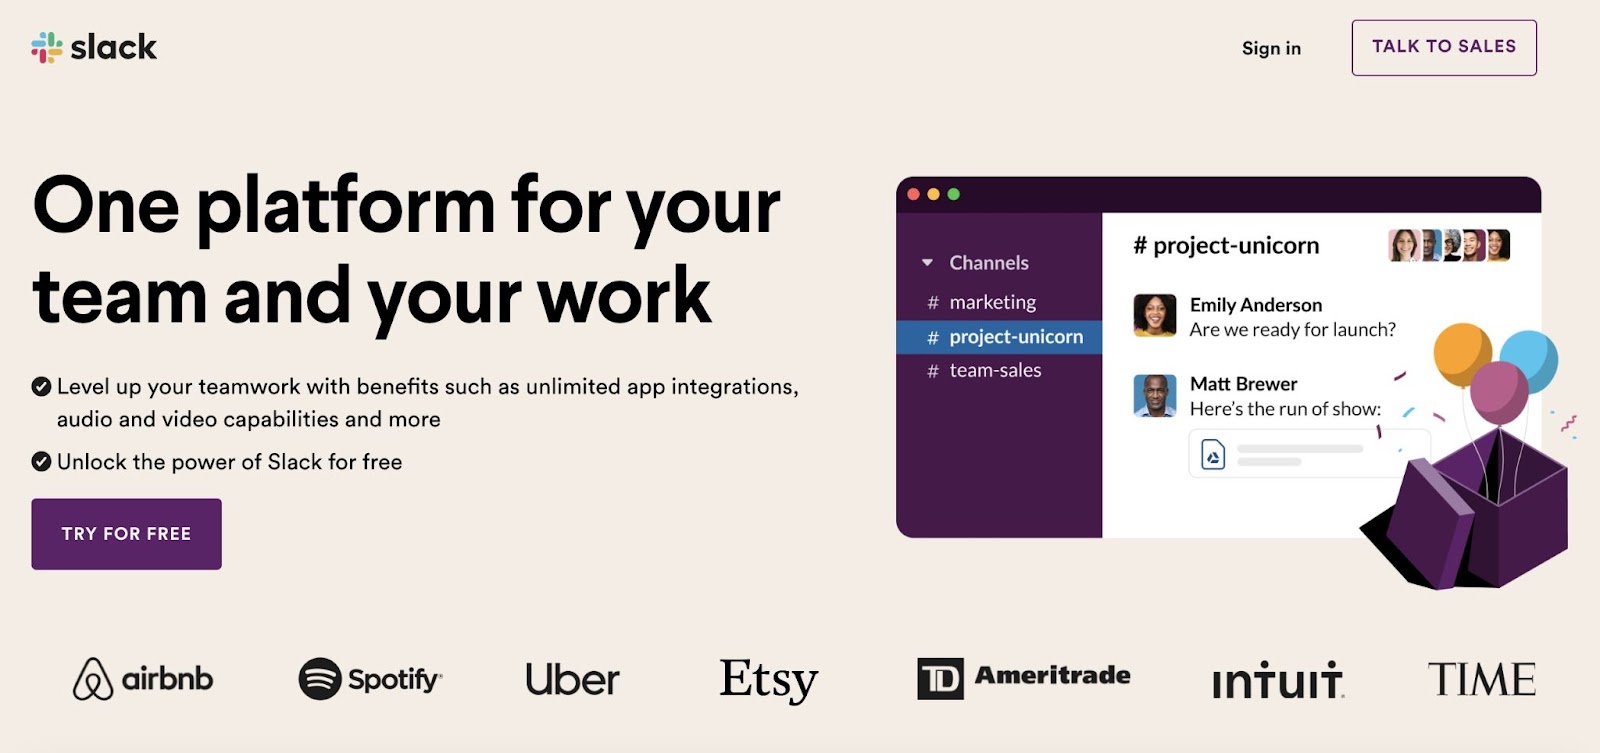 Slack's landing page with "One platform for your team and your work" headline